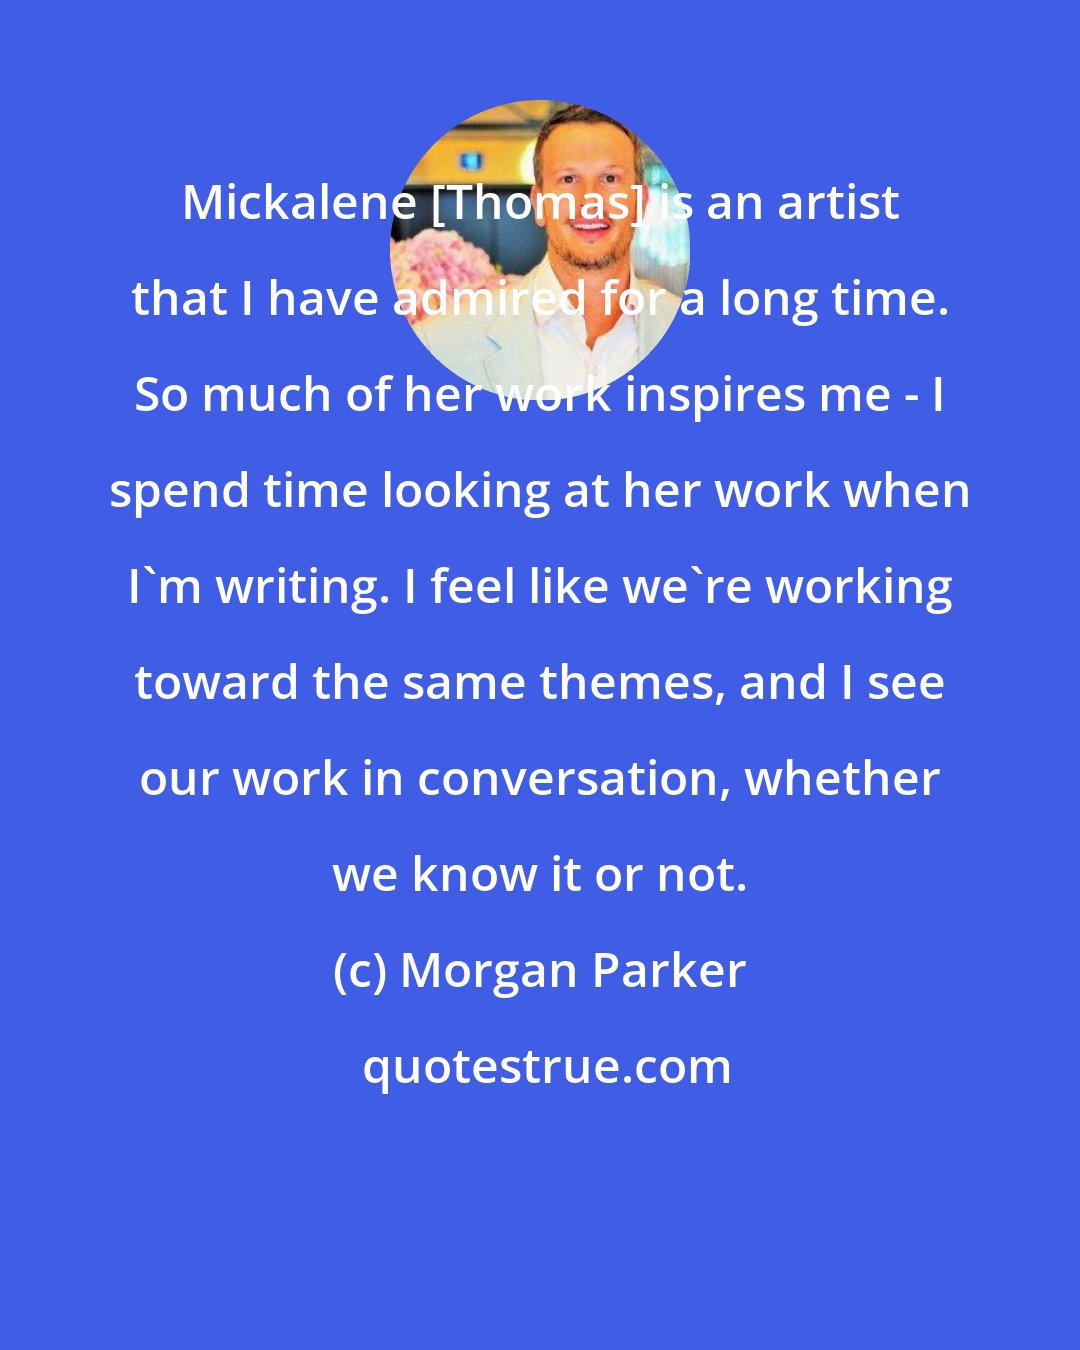 Morgan Parker: Mickalene [Thomas] is an artist that I have admired for a long time. So much of her work inspires me - I spend time looking at her work when I'm writing. I feel like we're working toward the same themes, and I see our work in conversation, whether we know it or not.